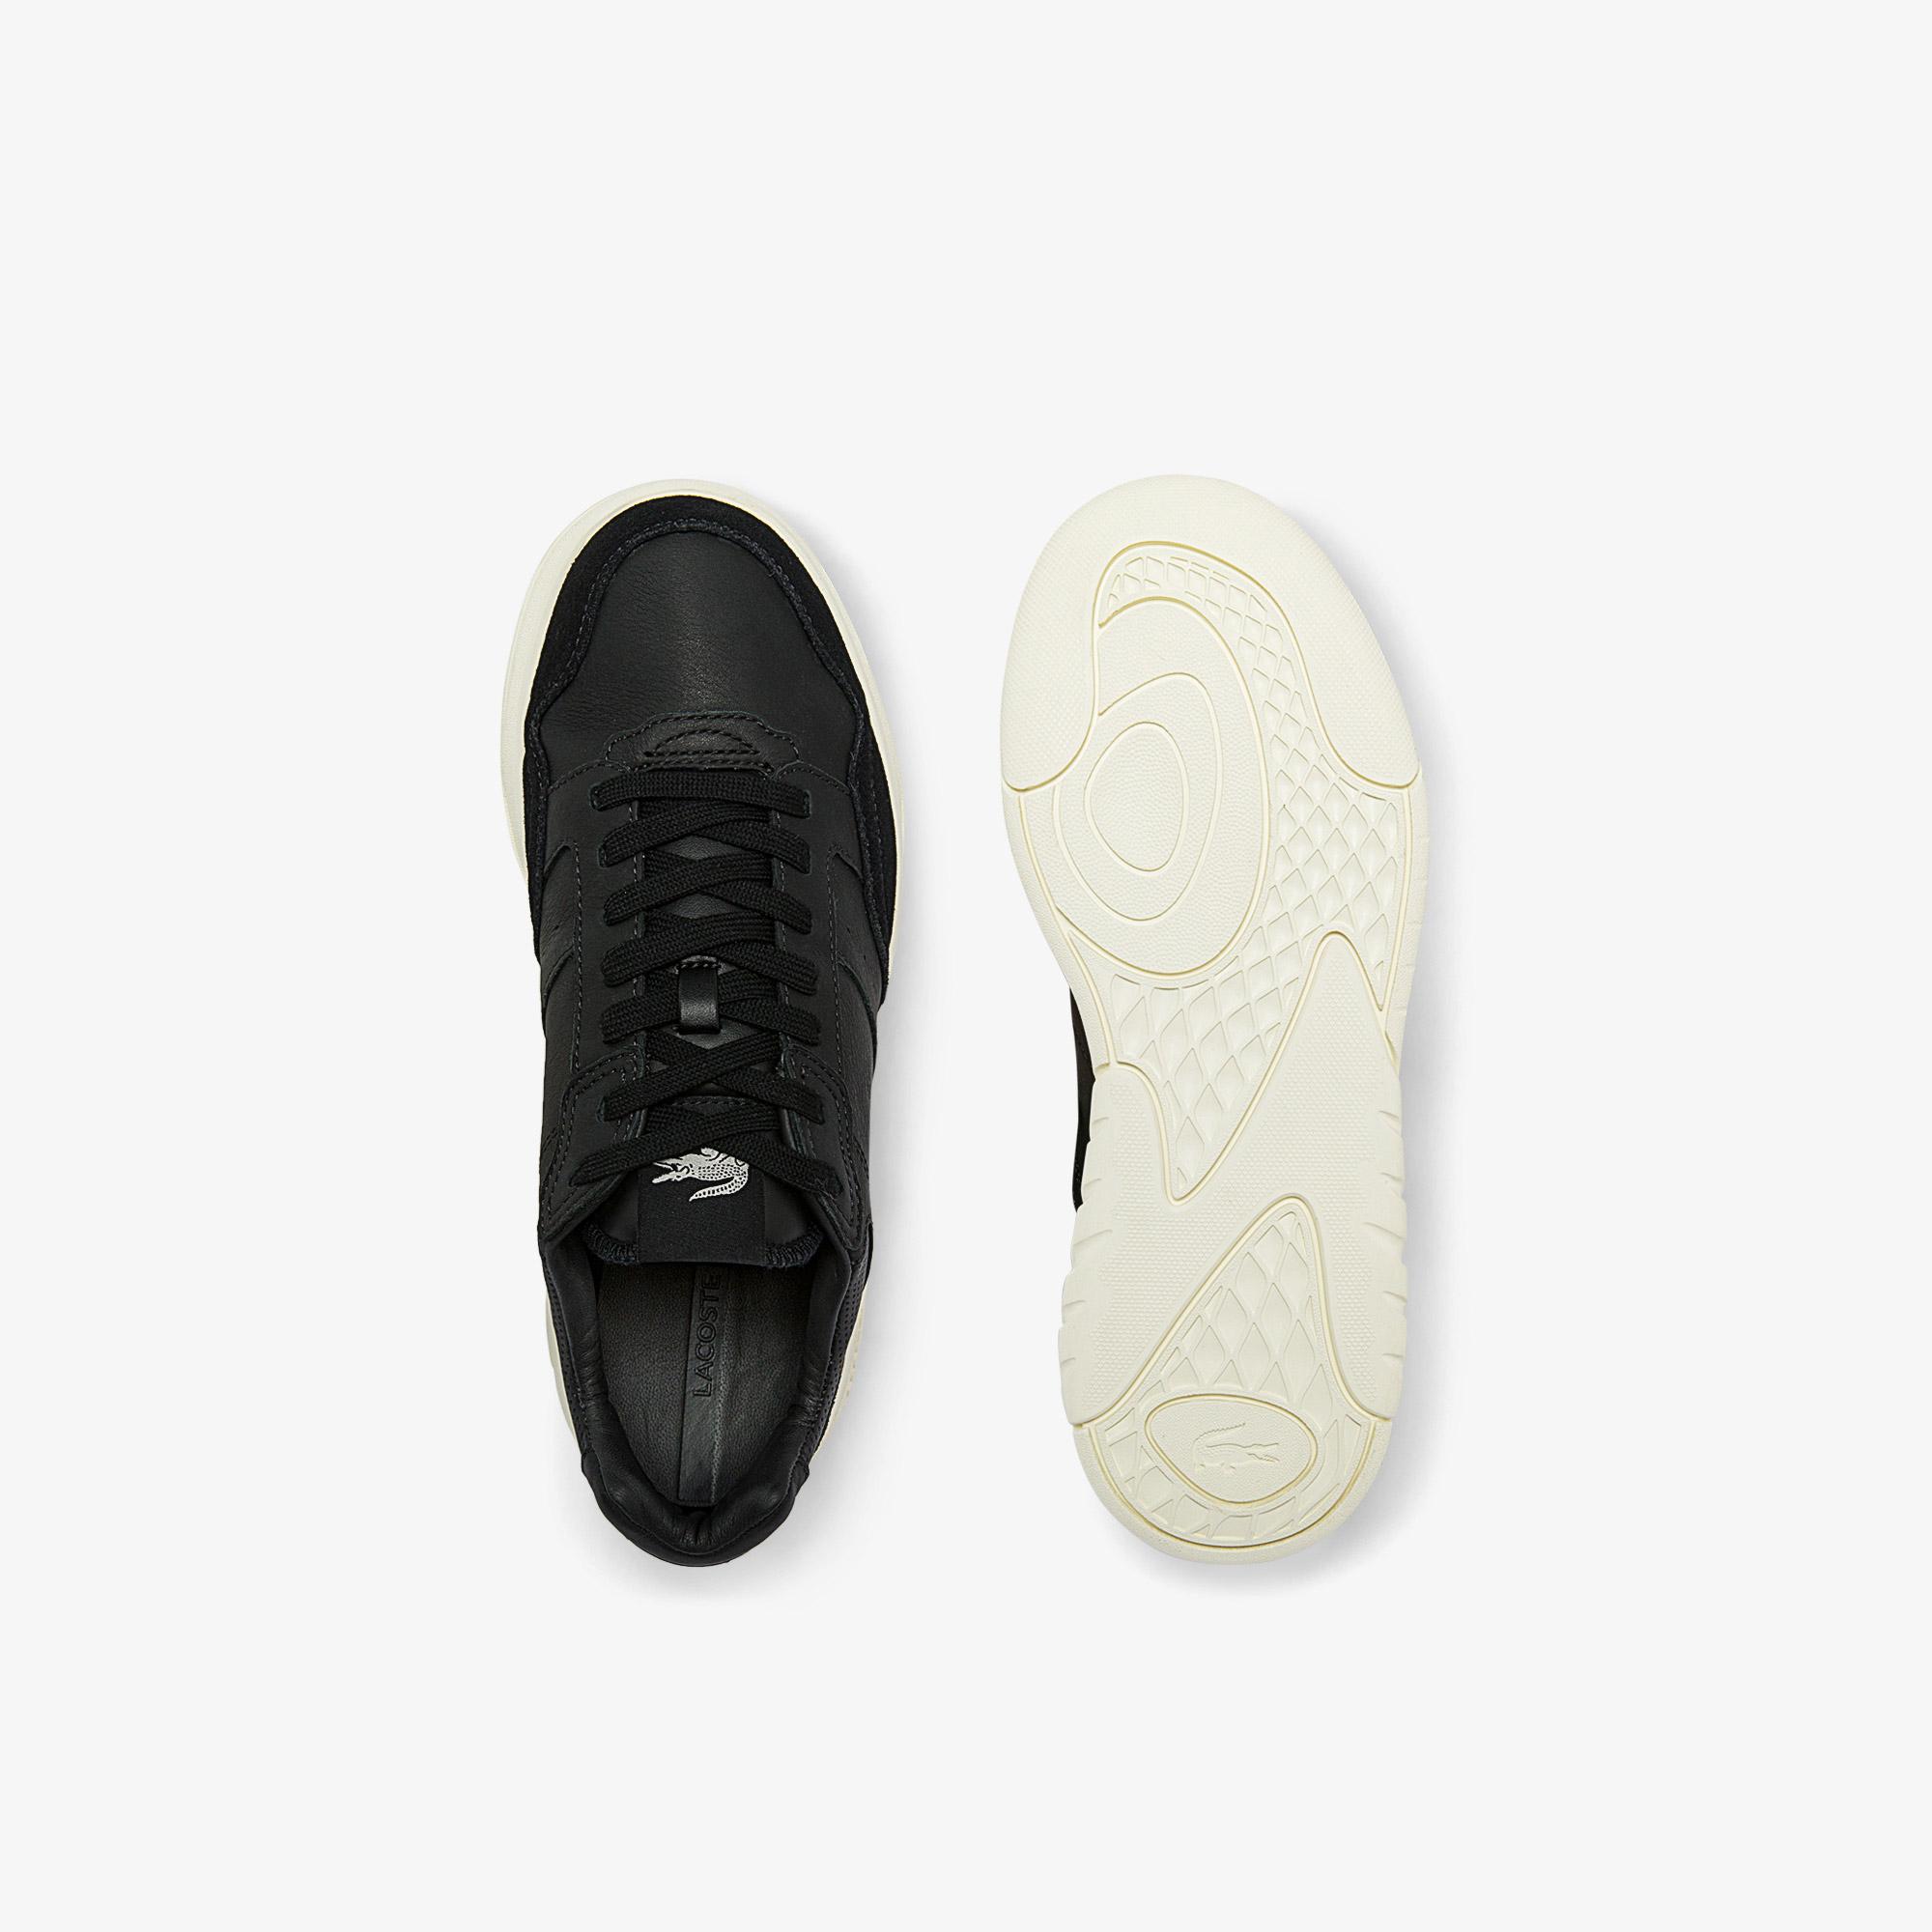 Lacoste Men's Game Advance Sneakers. 5